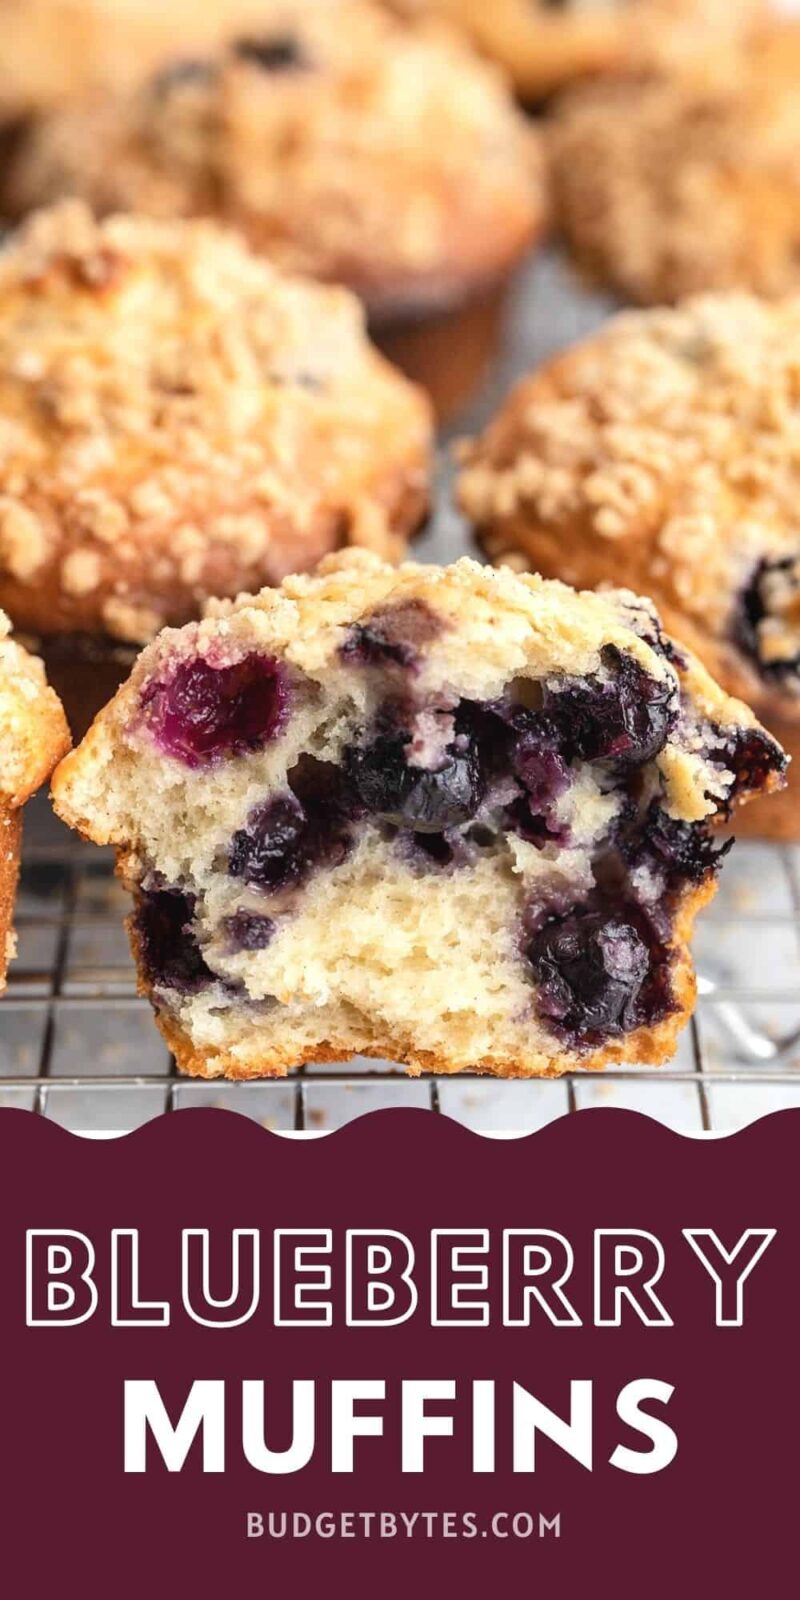 Front view of a blueberry muffin torn in half.